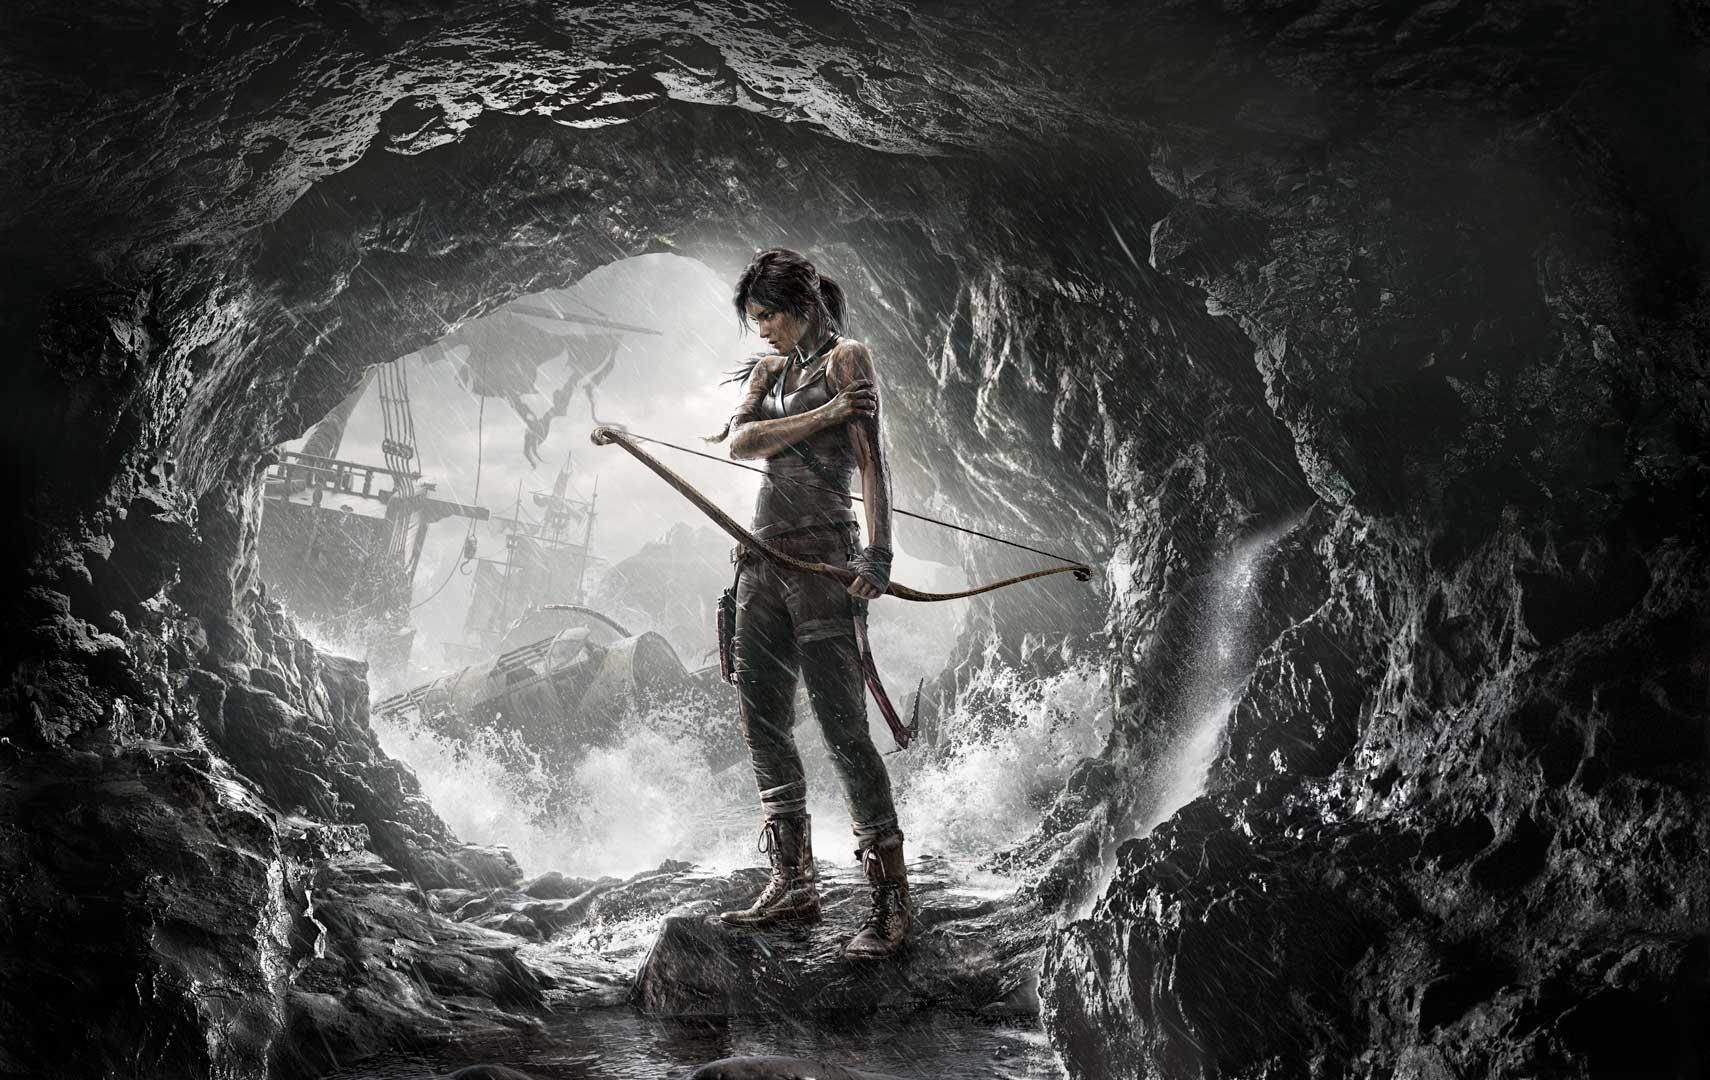 A somber, atmospheric scene of Lara holding a bow, standing at the entrance of a cave with a shipwreck in the distance.